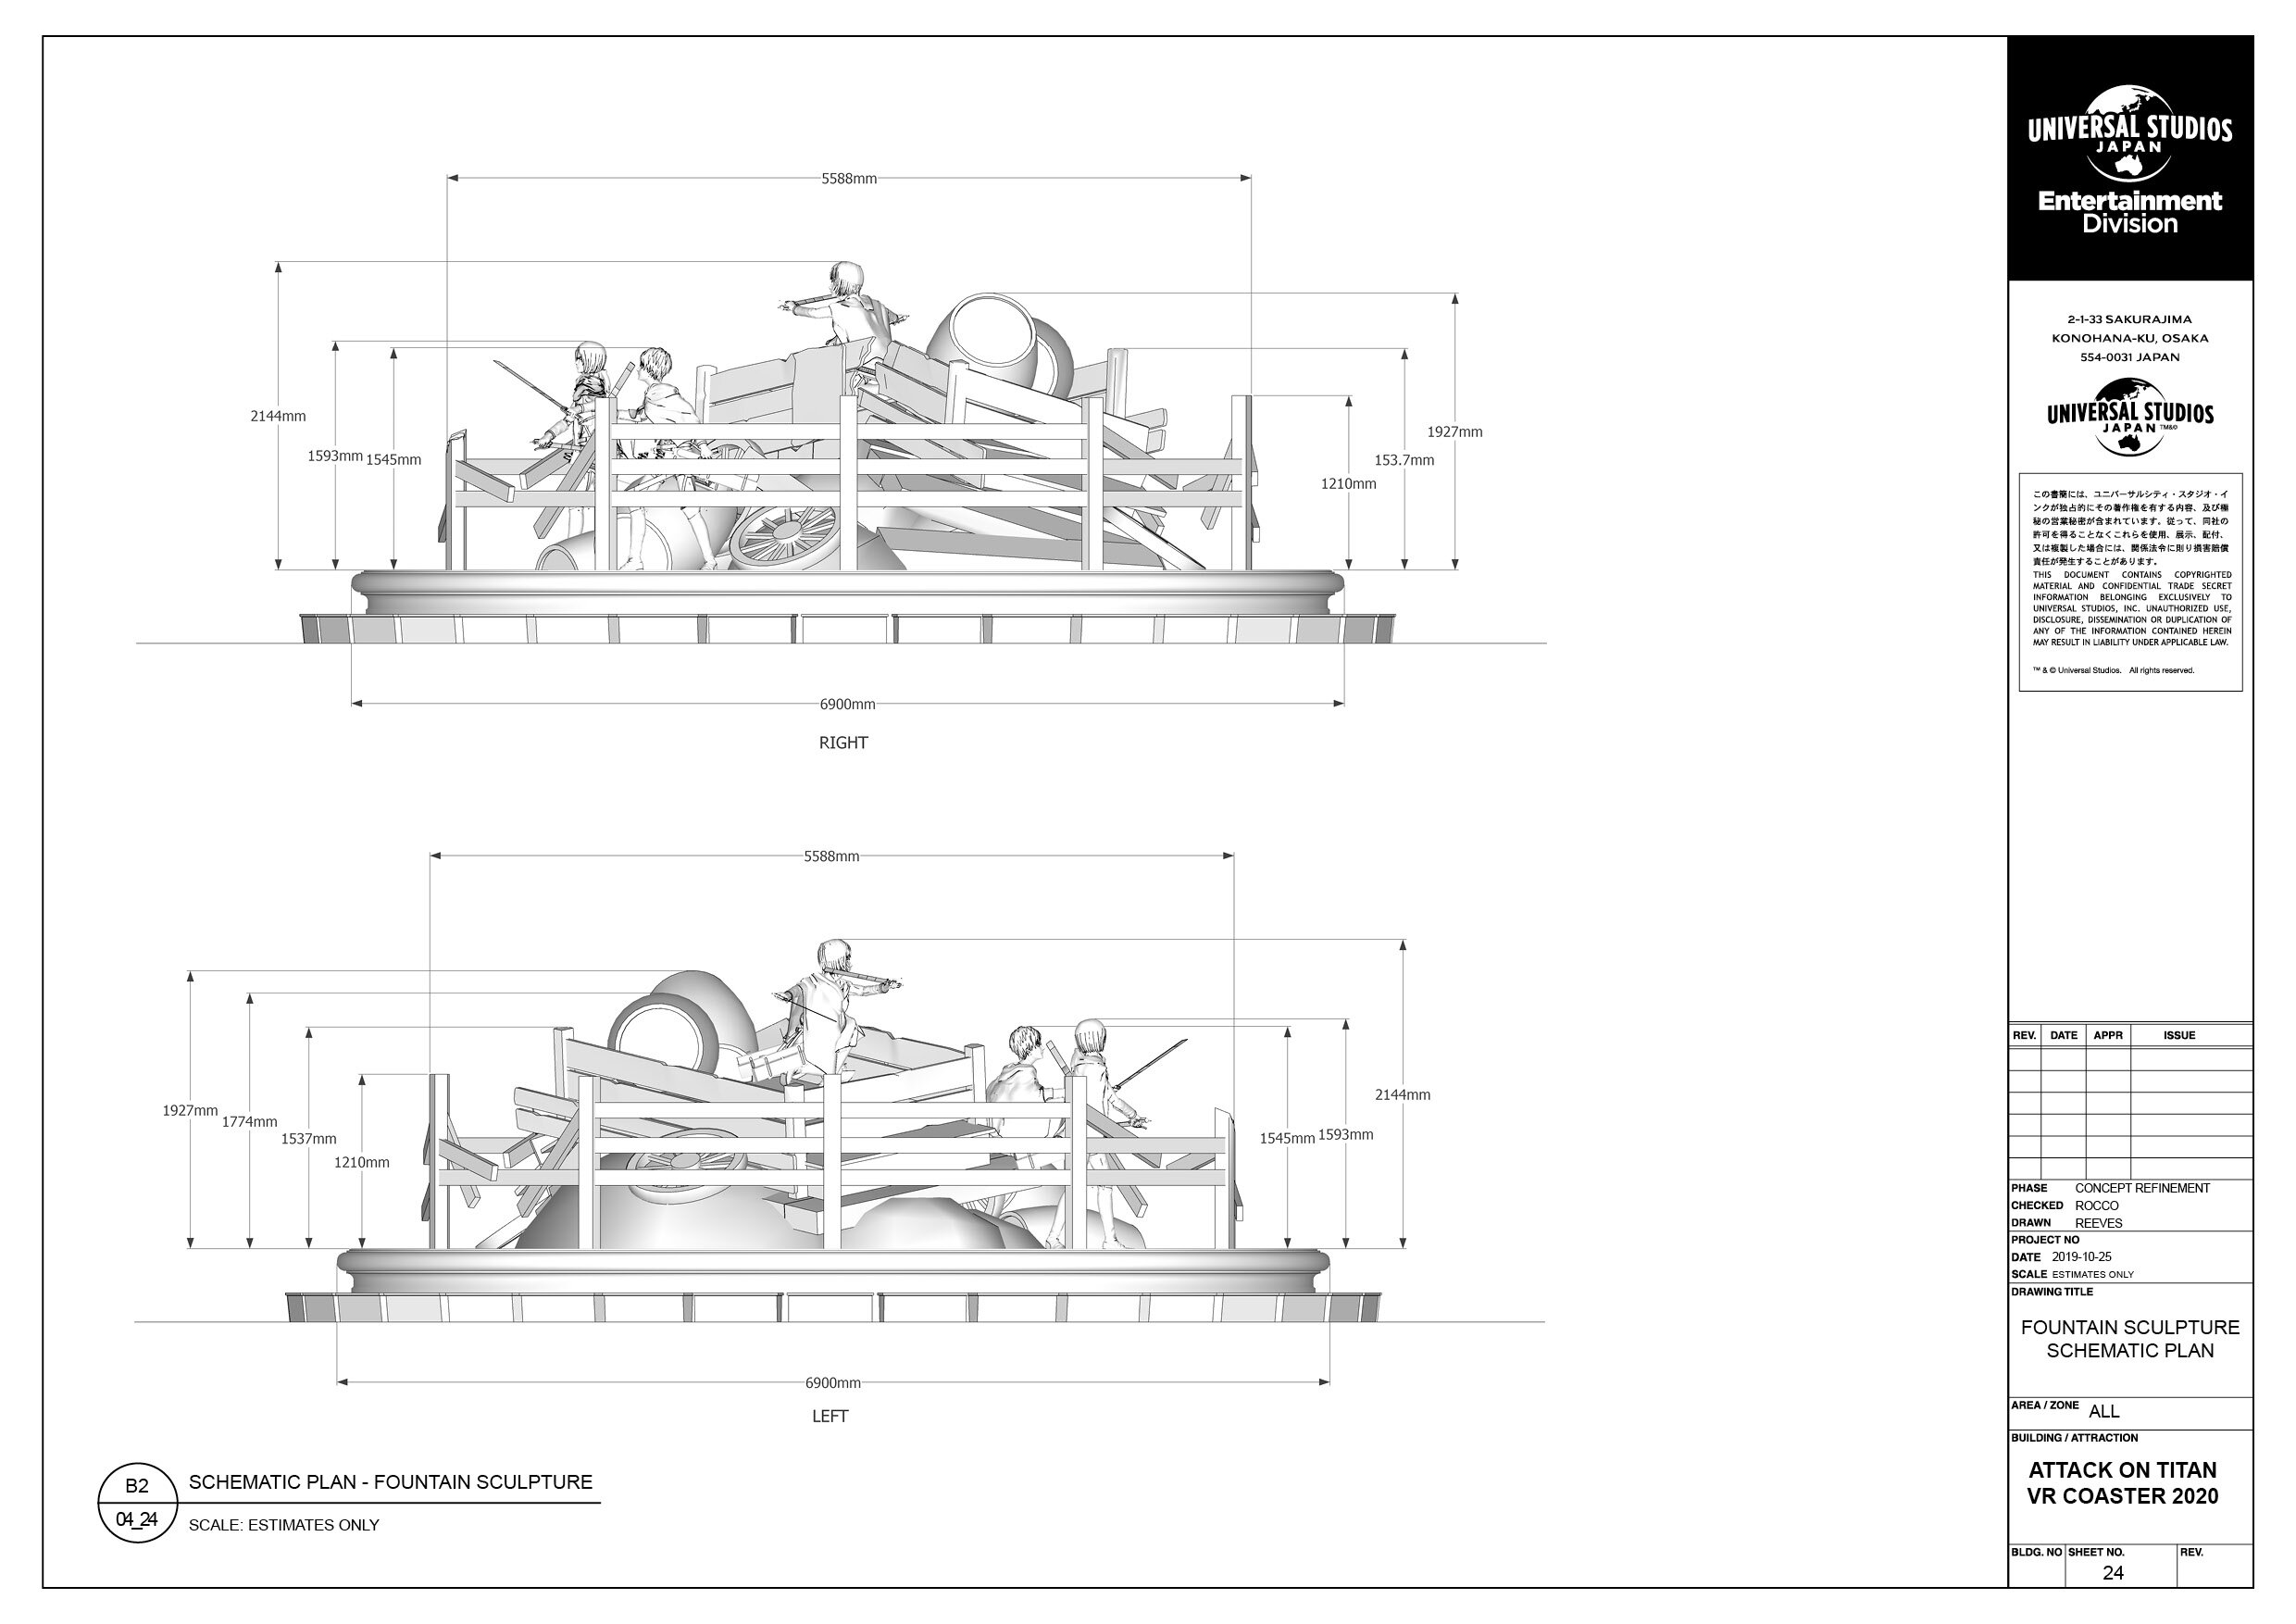  CAD drawings from fabrication vendor 